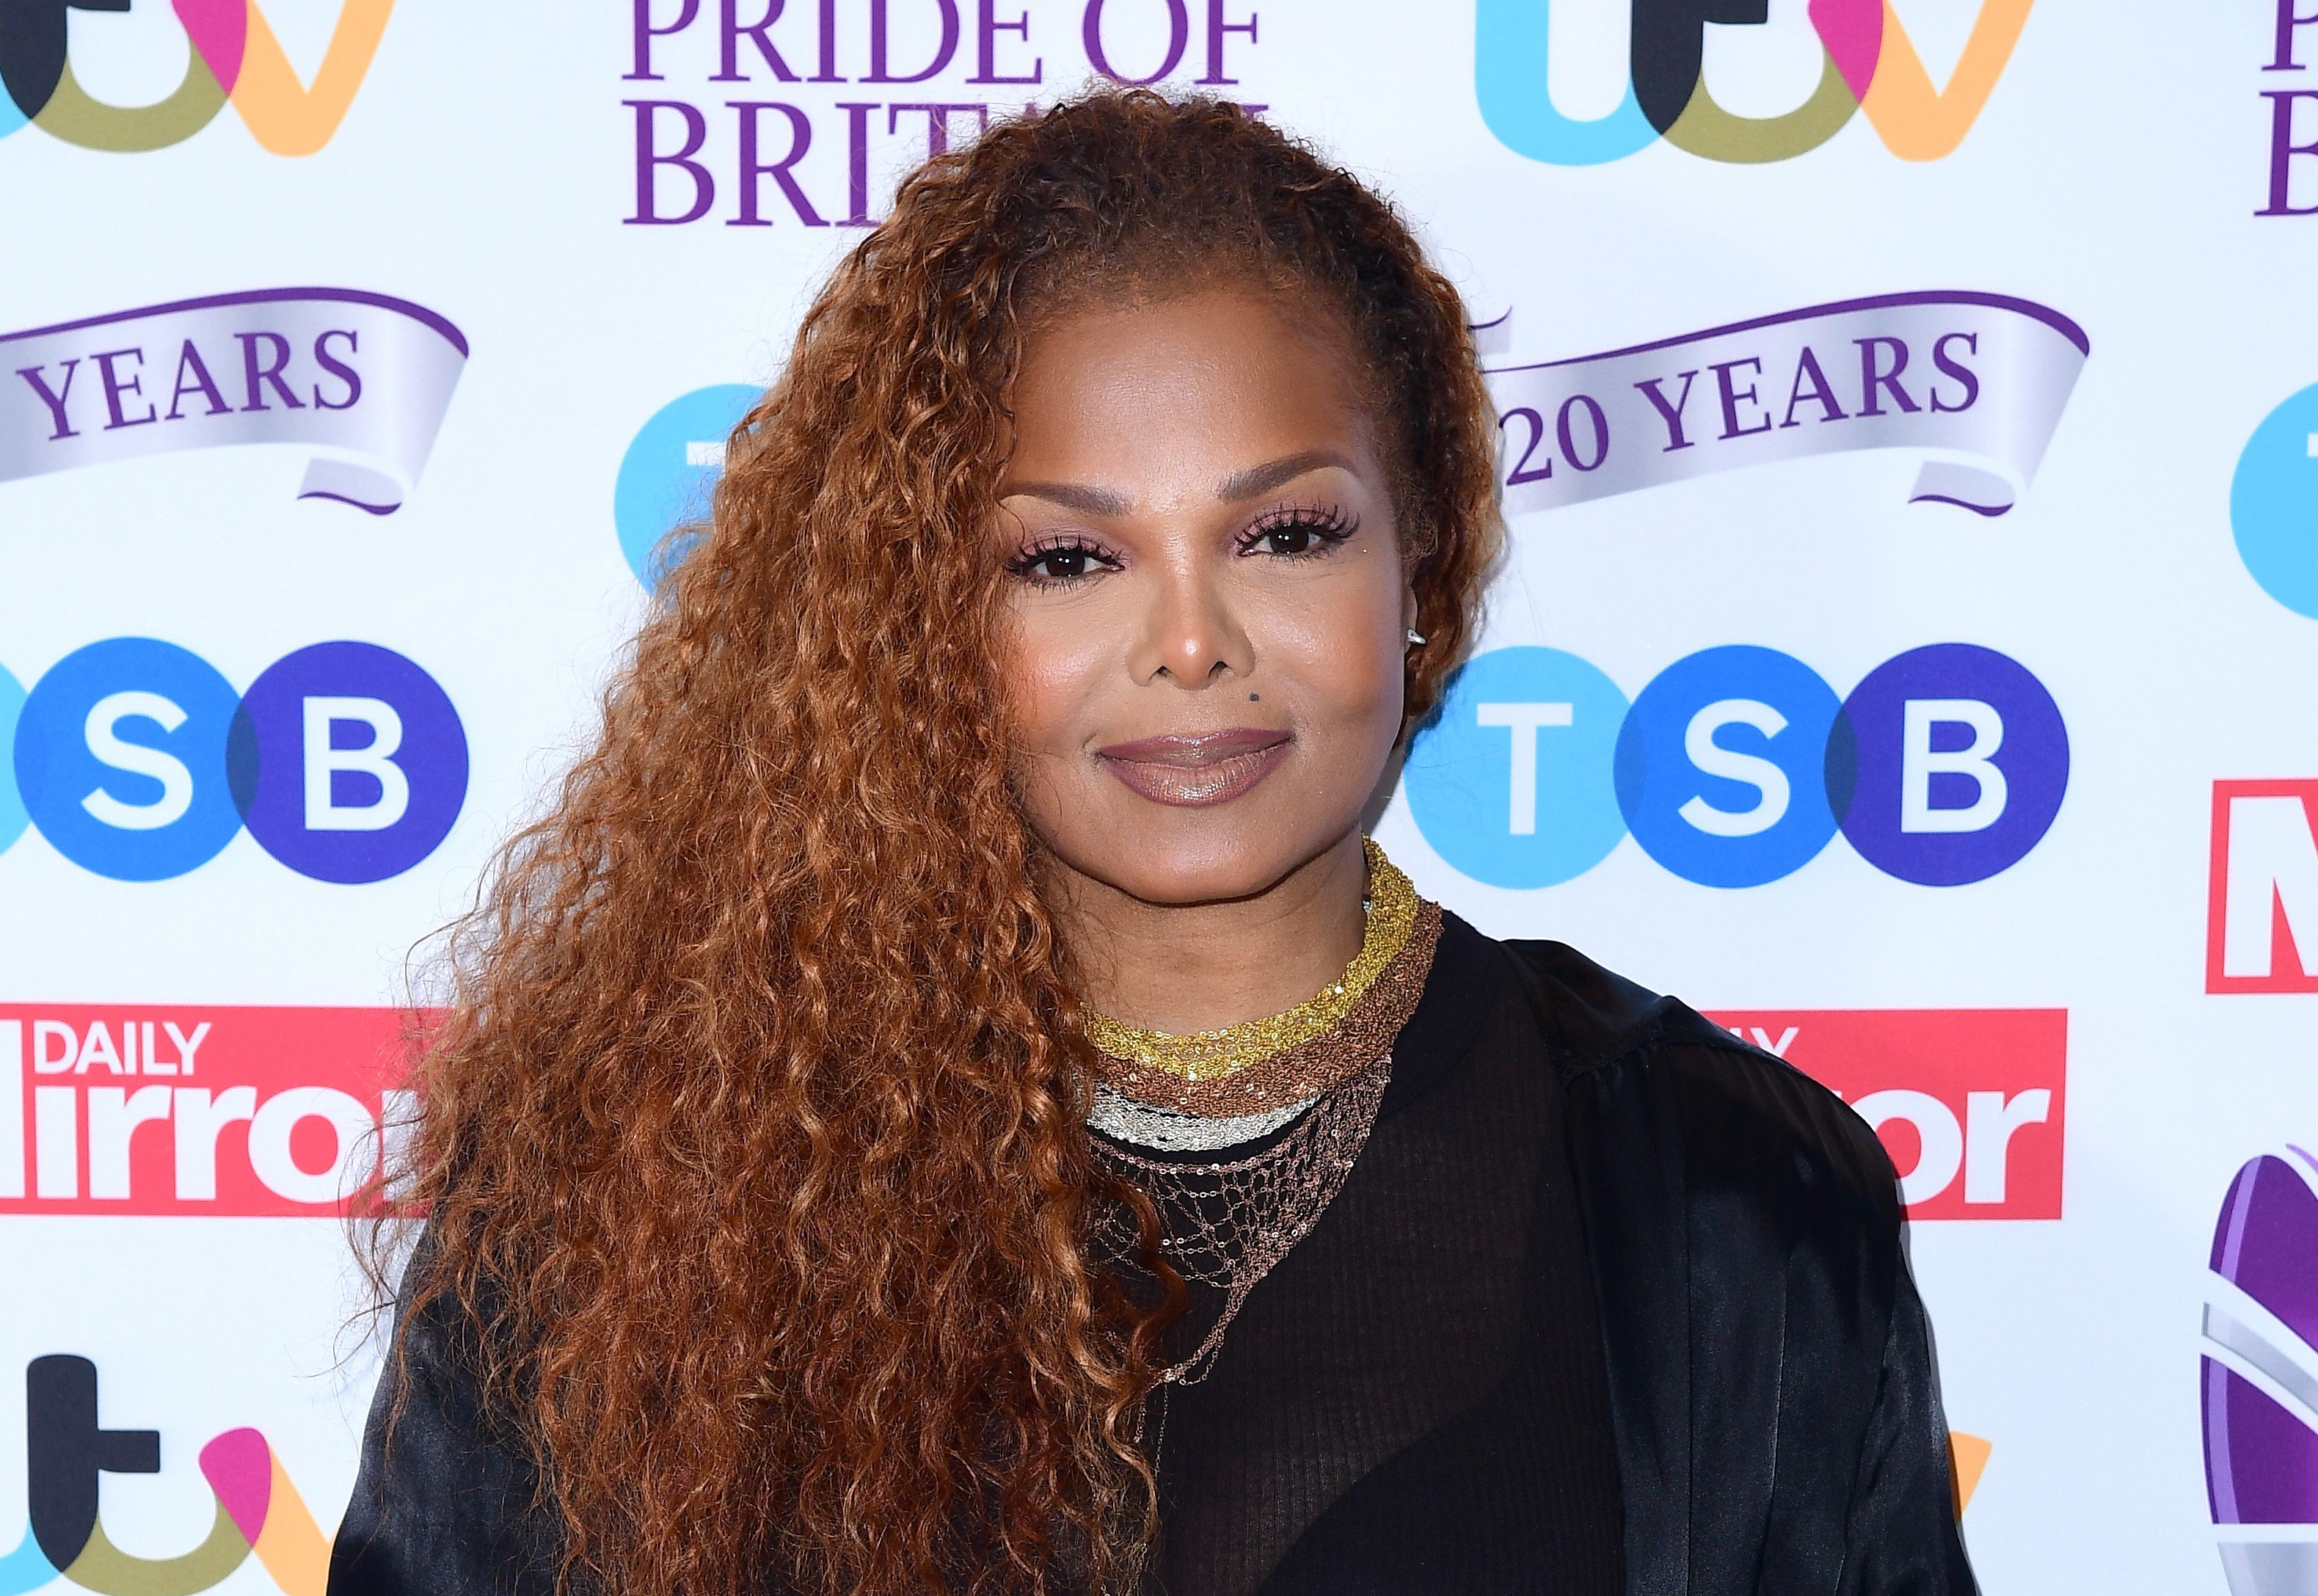 Janet Jackson in the press room during the Pride of Britain Awards in 2019